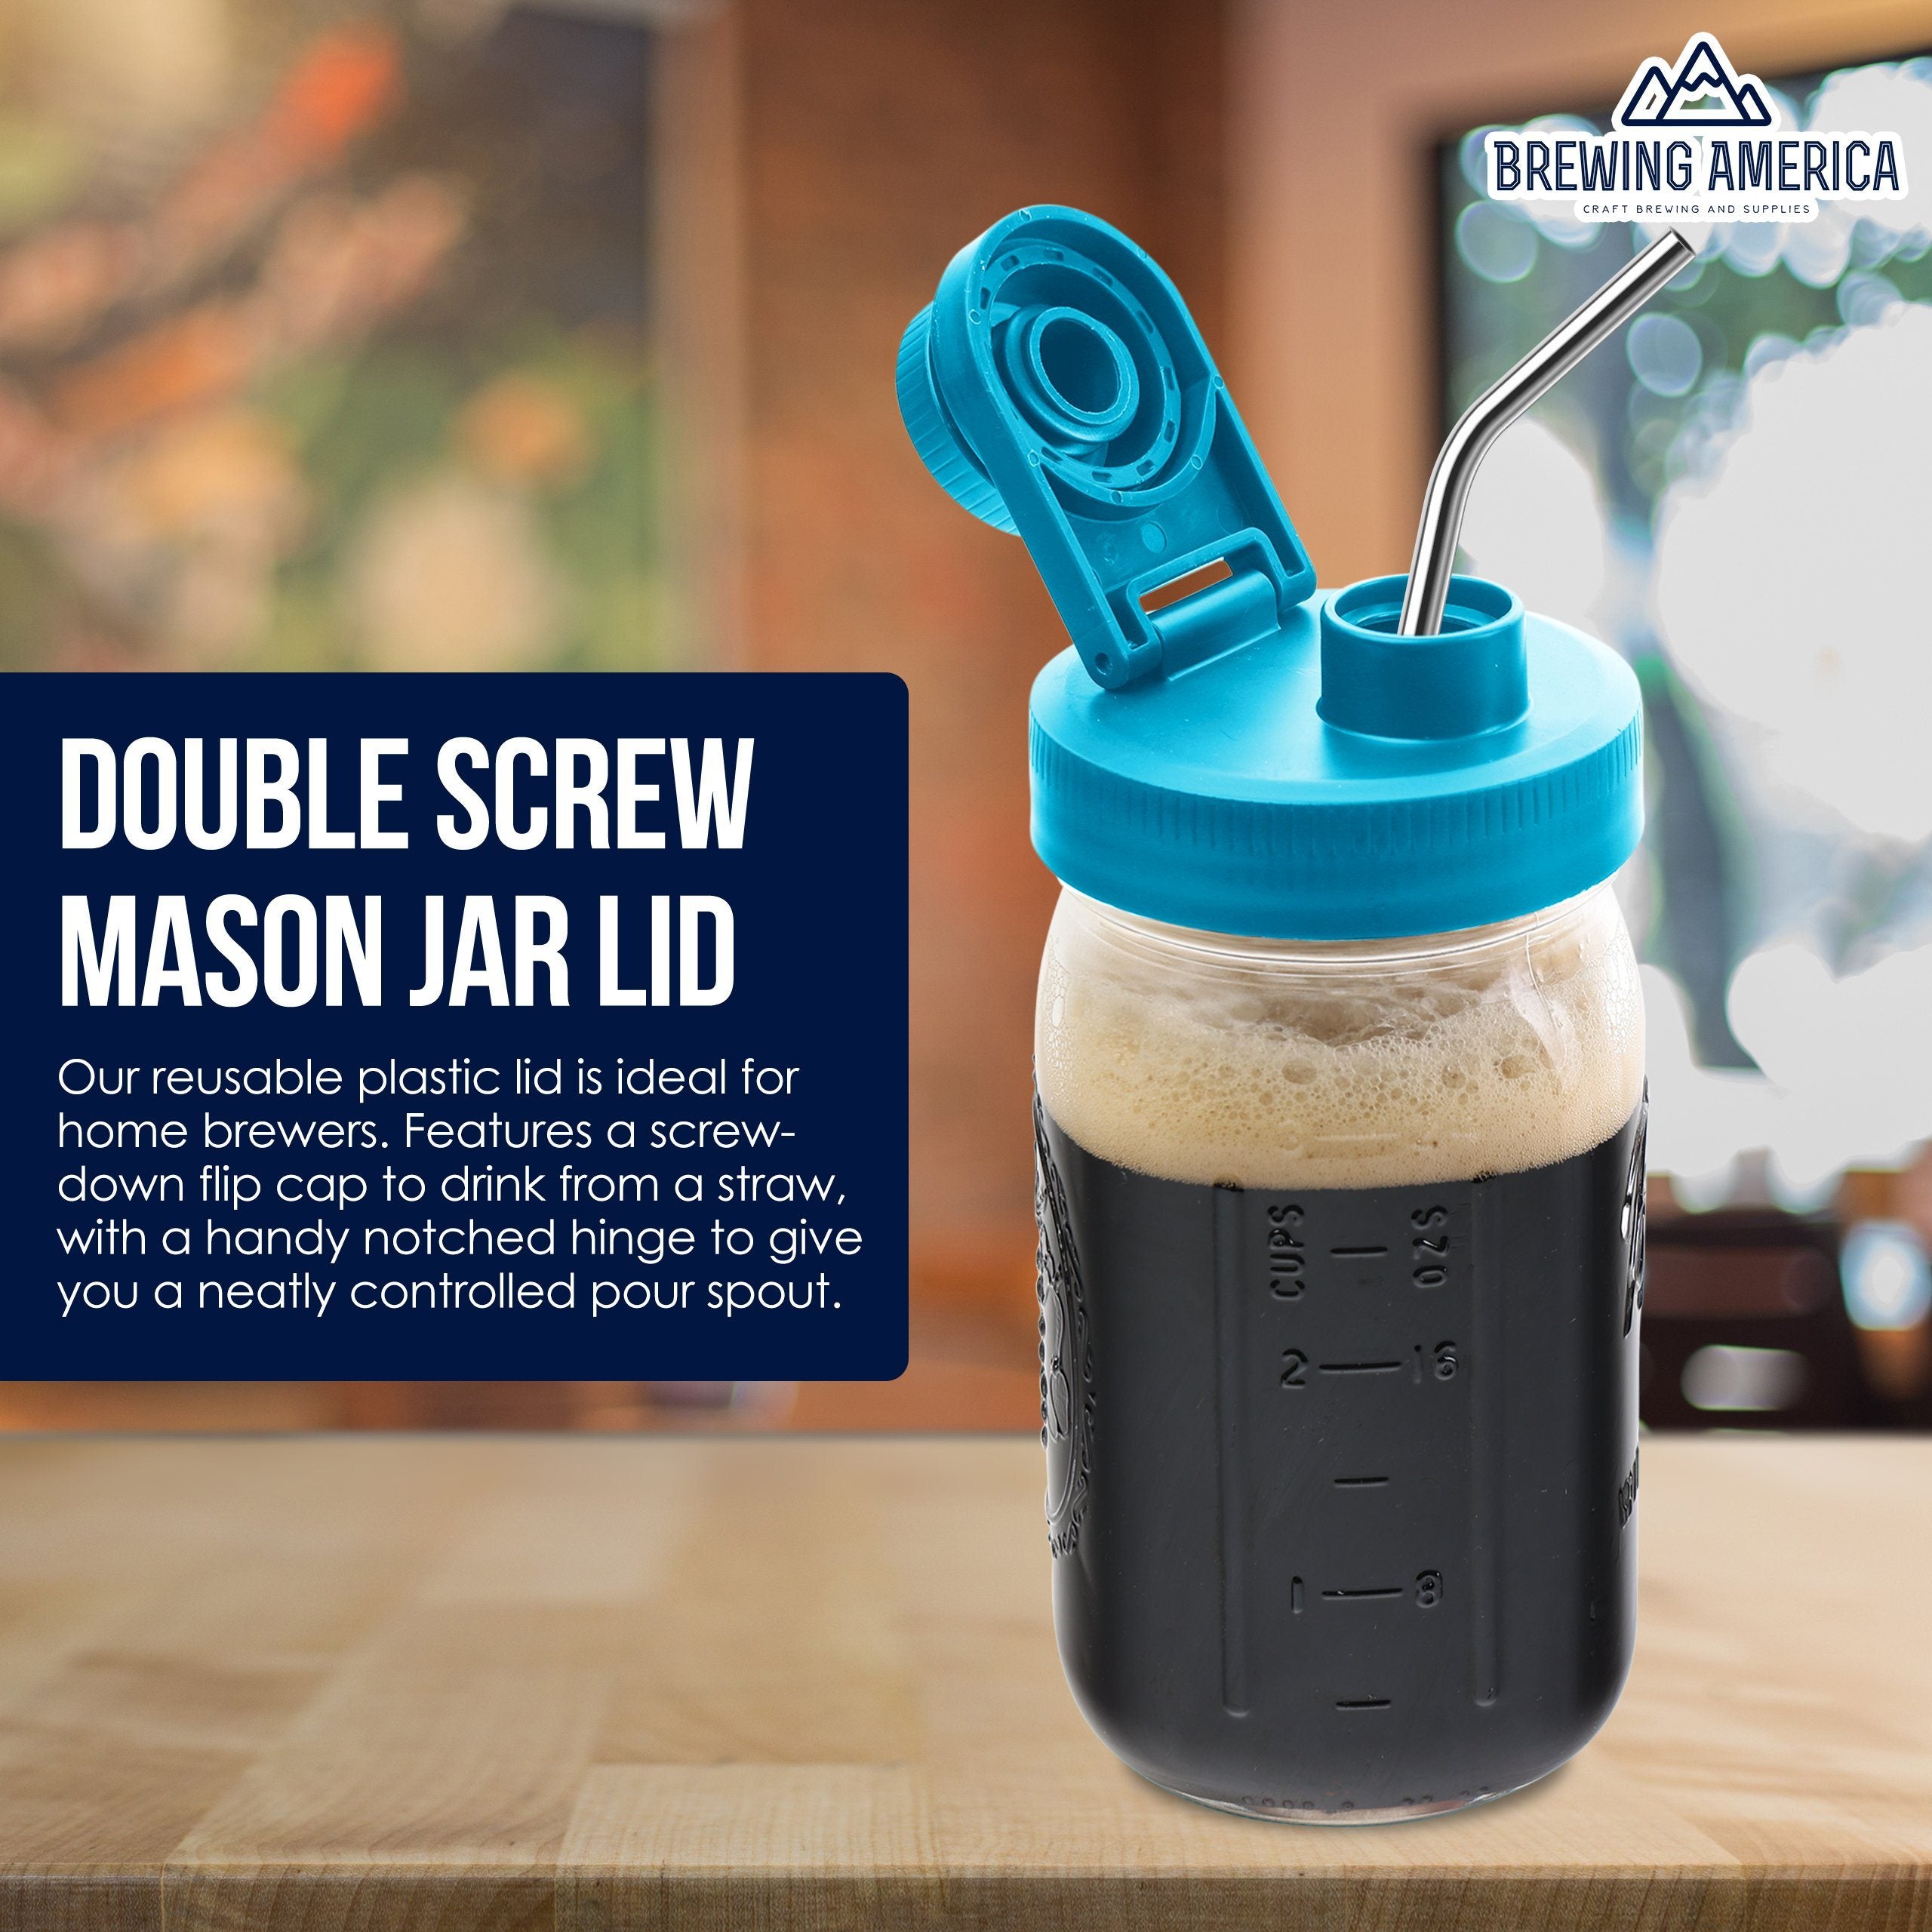 Mason Jar Lids Wide Mouth Plastic 4 Pack Leak Proof with Flip Cap Pouring Spout & Drink Hole Teal Accessories Brewing America 